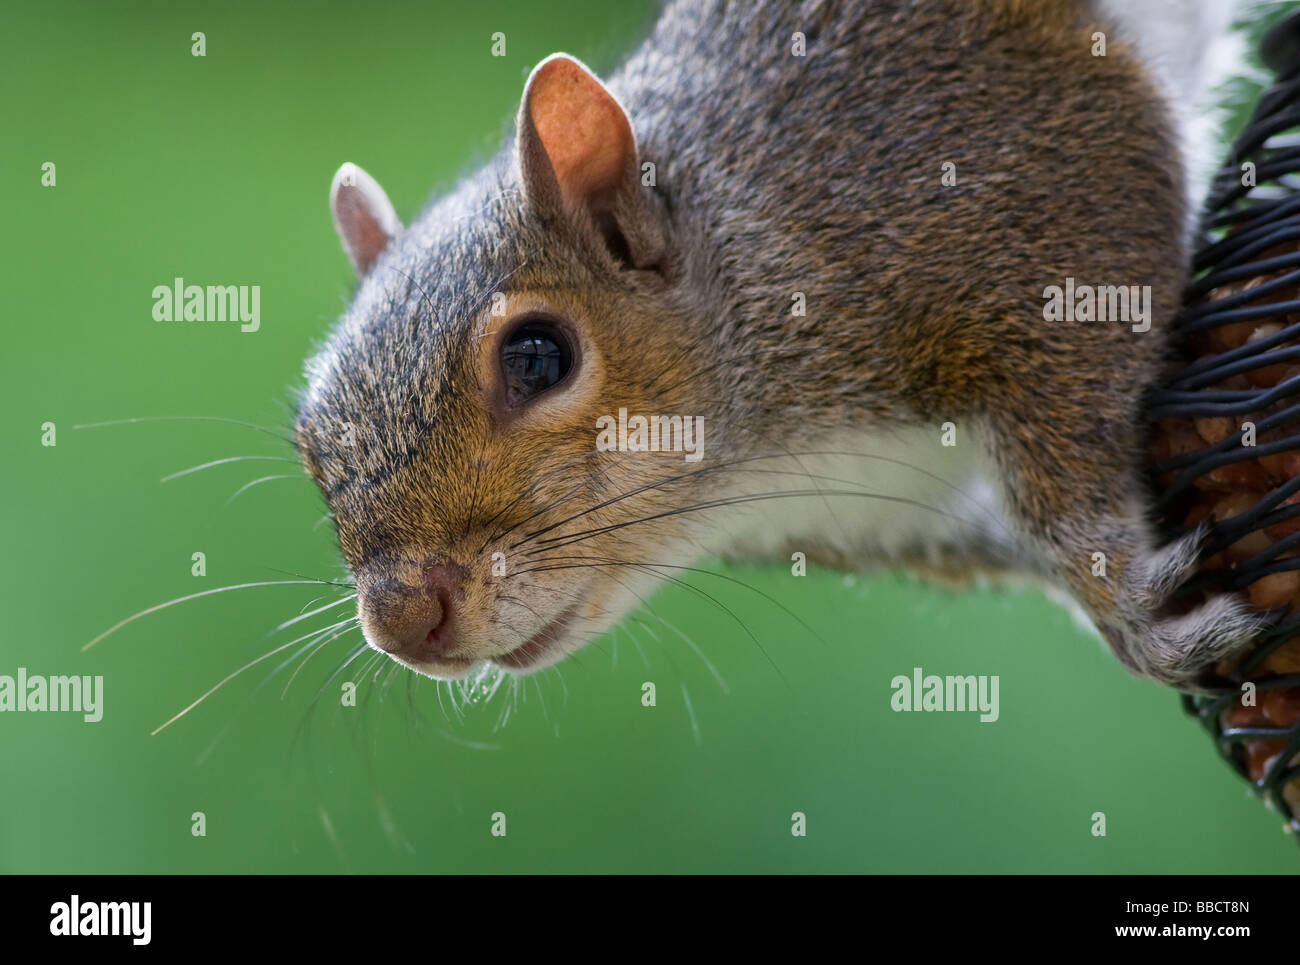 Cheeky Squirrel Stock Photo